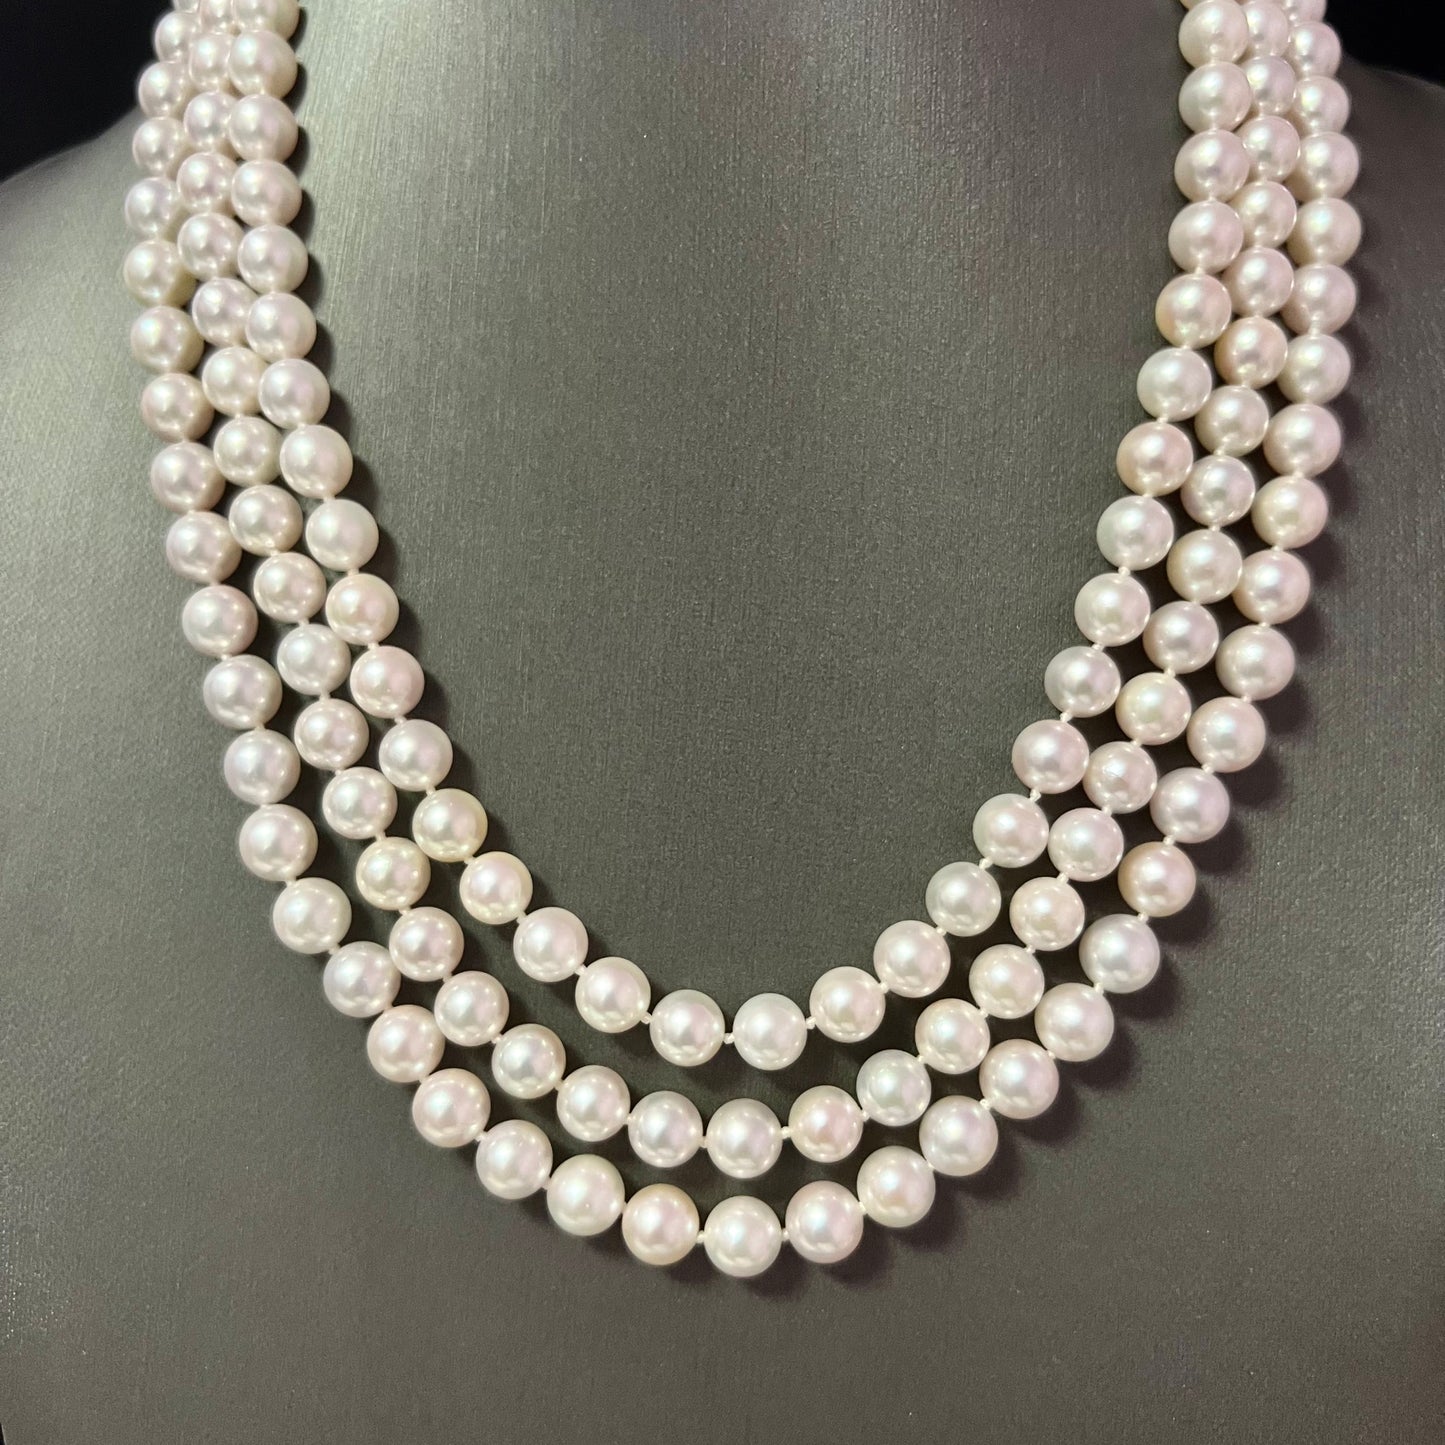 Natural Akoya Pearl Diamond Necklace 60.5" 18k White Gold 8 mm Certified $7,950 307925 - Certified Fine Jewelry